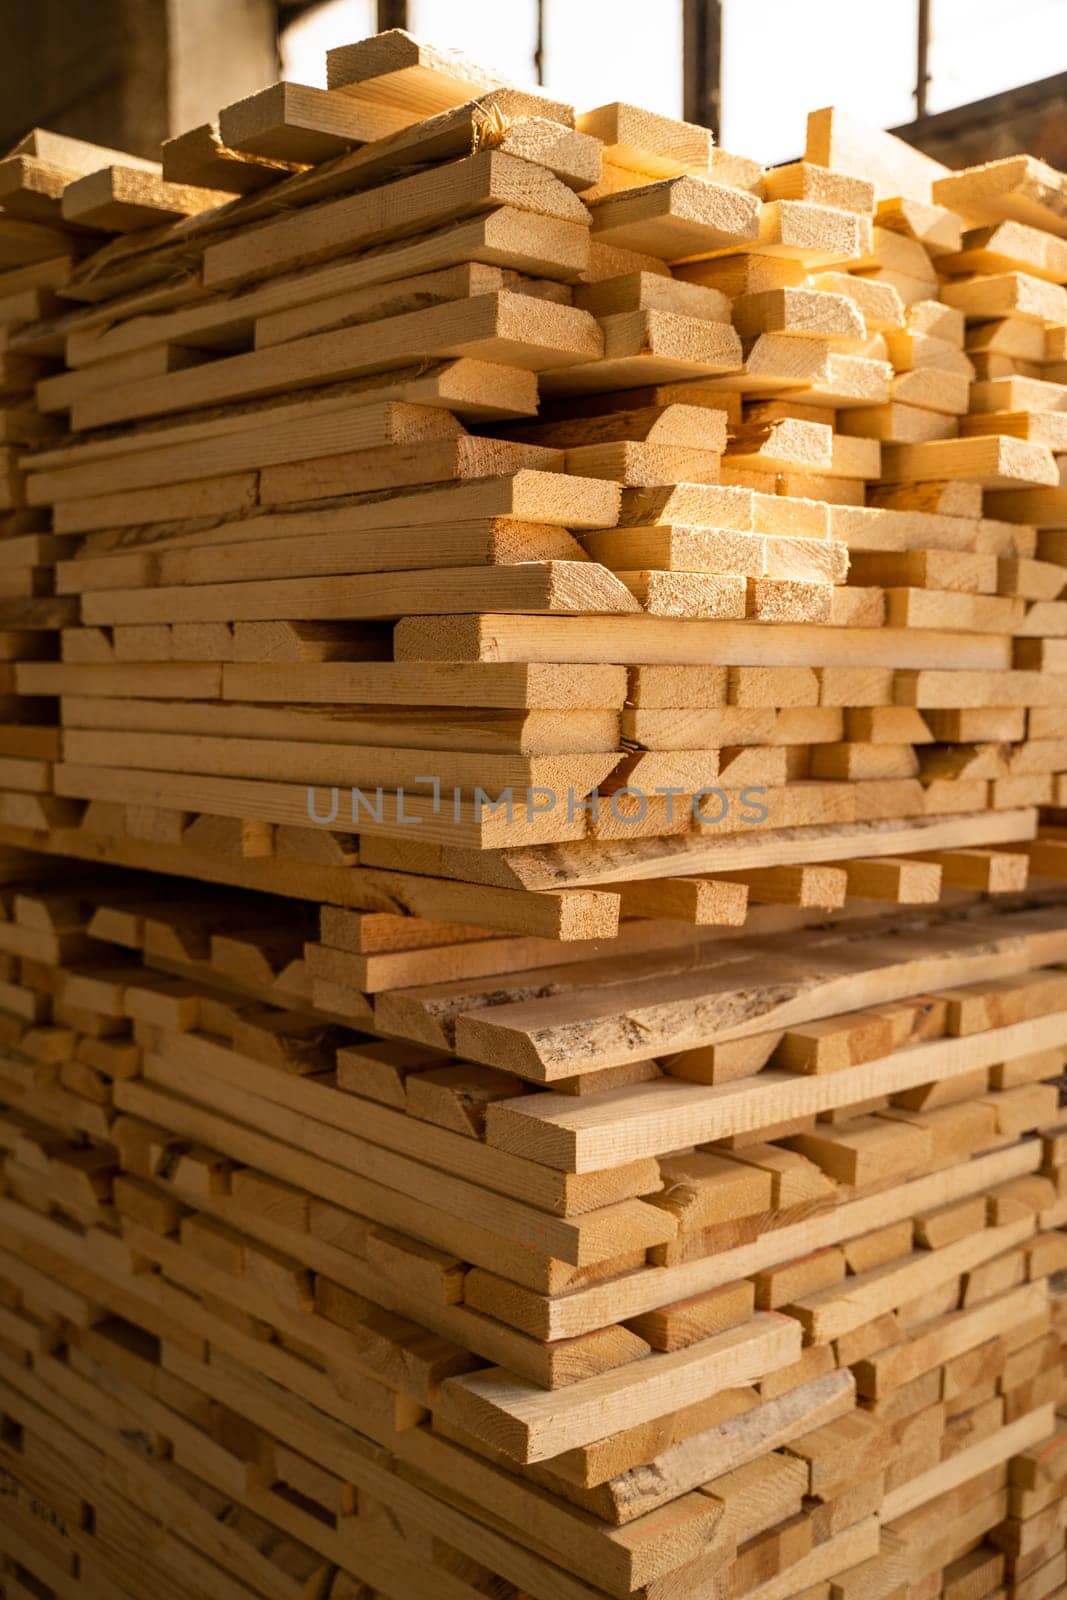 Wood processing. Stacked wooden boards at lumber warehouse in a woodworking industry. Stacks with pine lumber. Raw wood drying in the lumber warehouse